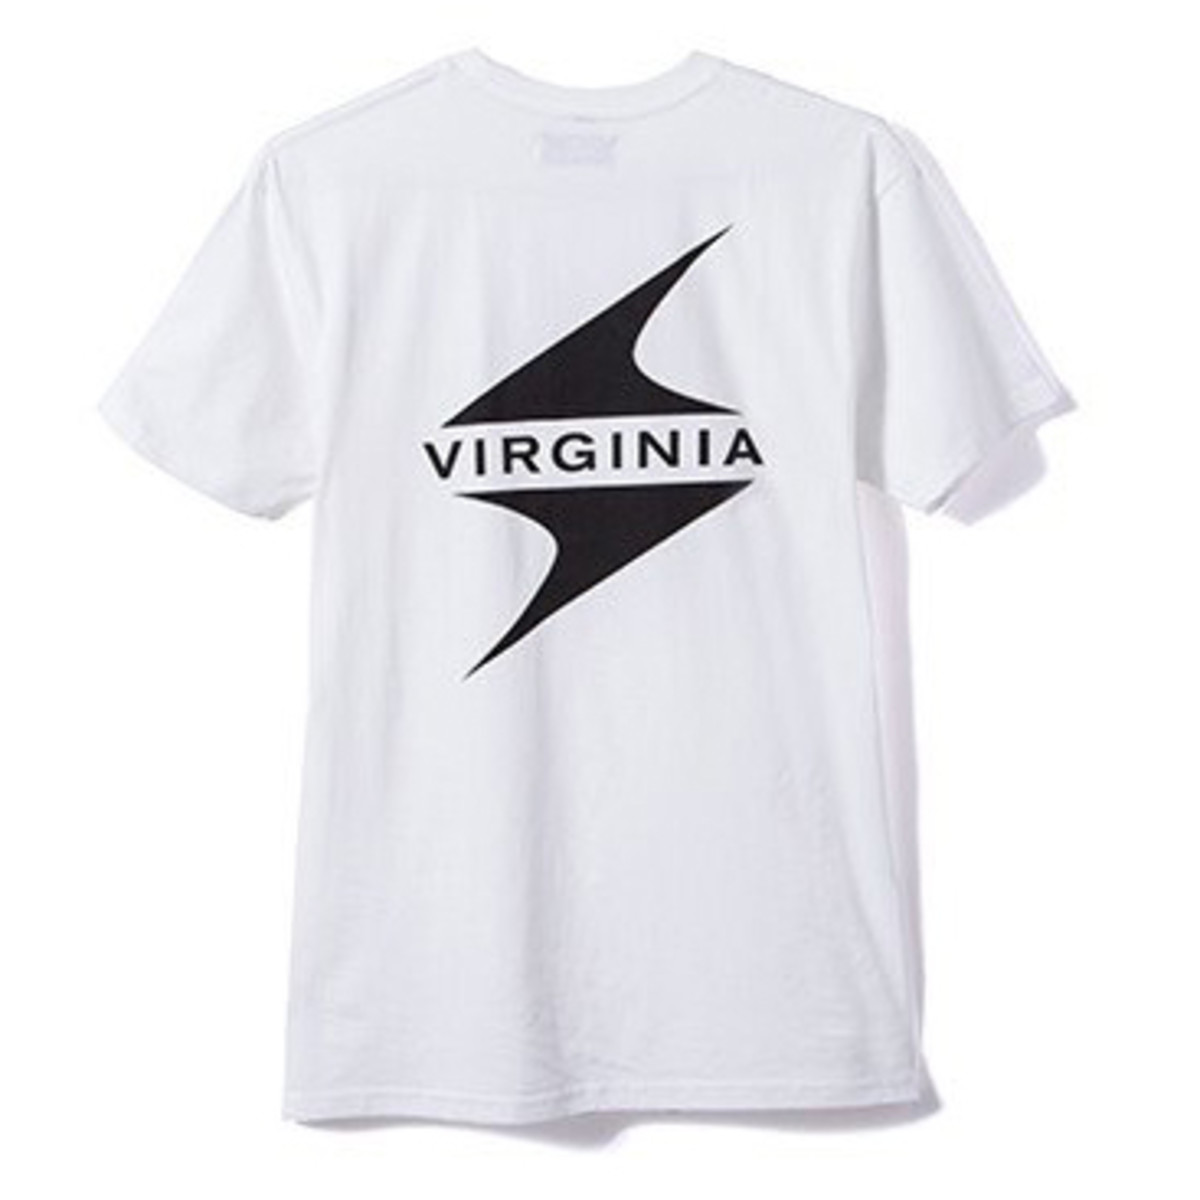 Virginia tee (in white or black), $38, available at Commonweath.